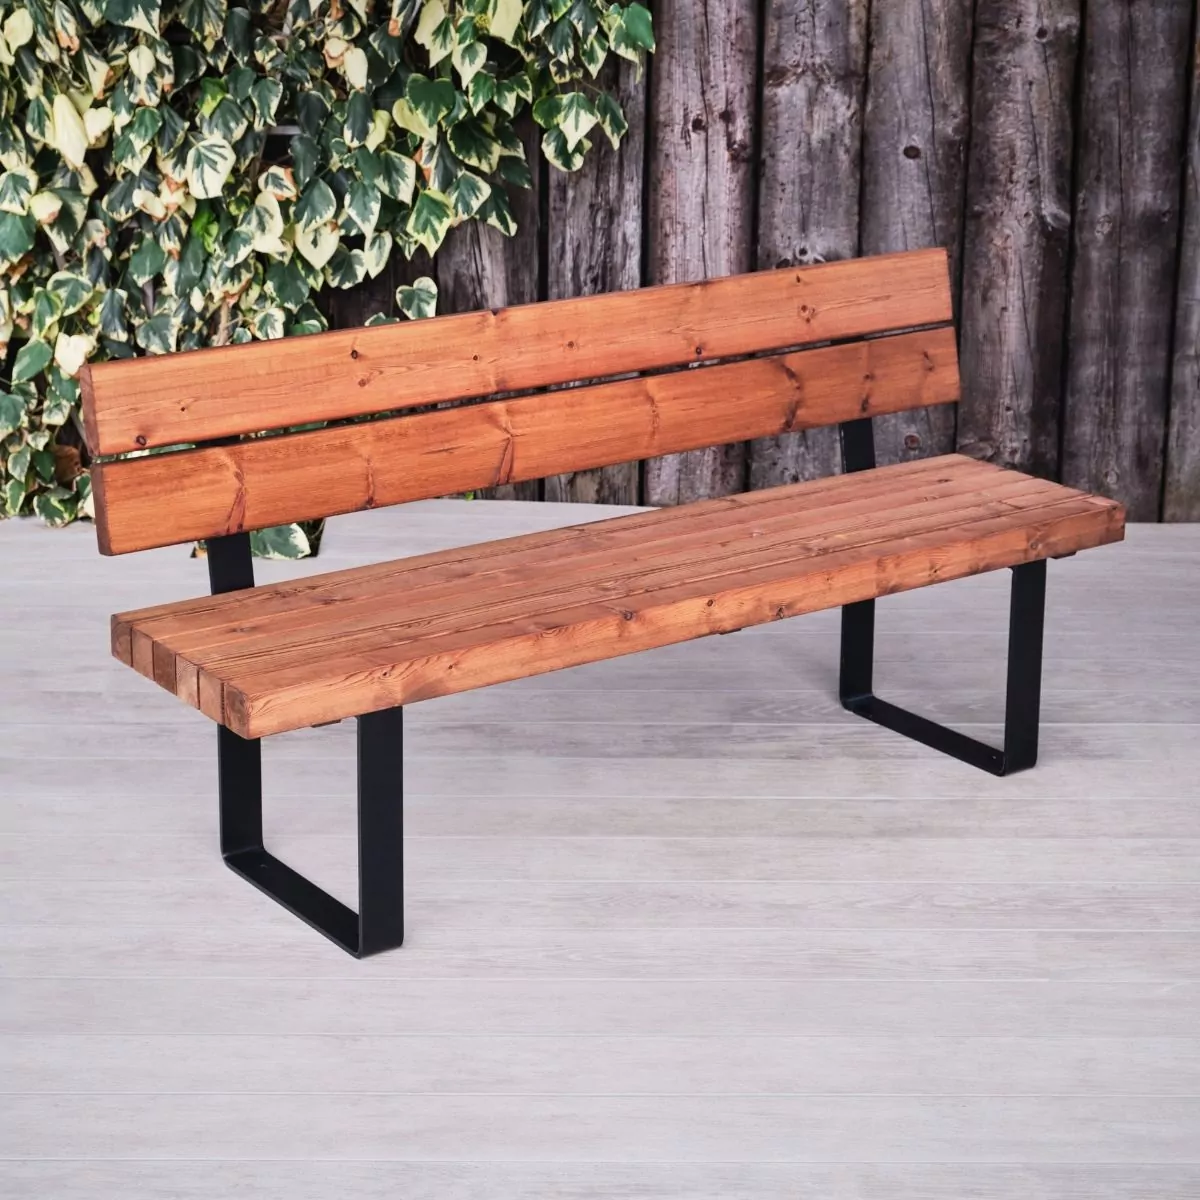 wood-and-metal-industrial-outdoor-commercial-bench-with-back-6